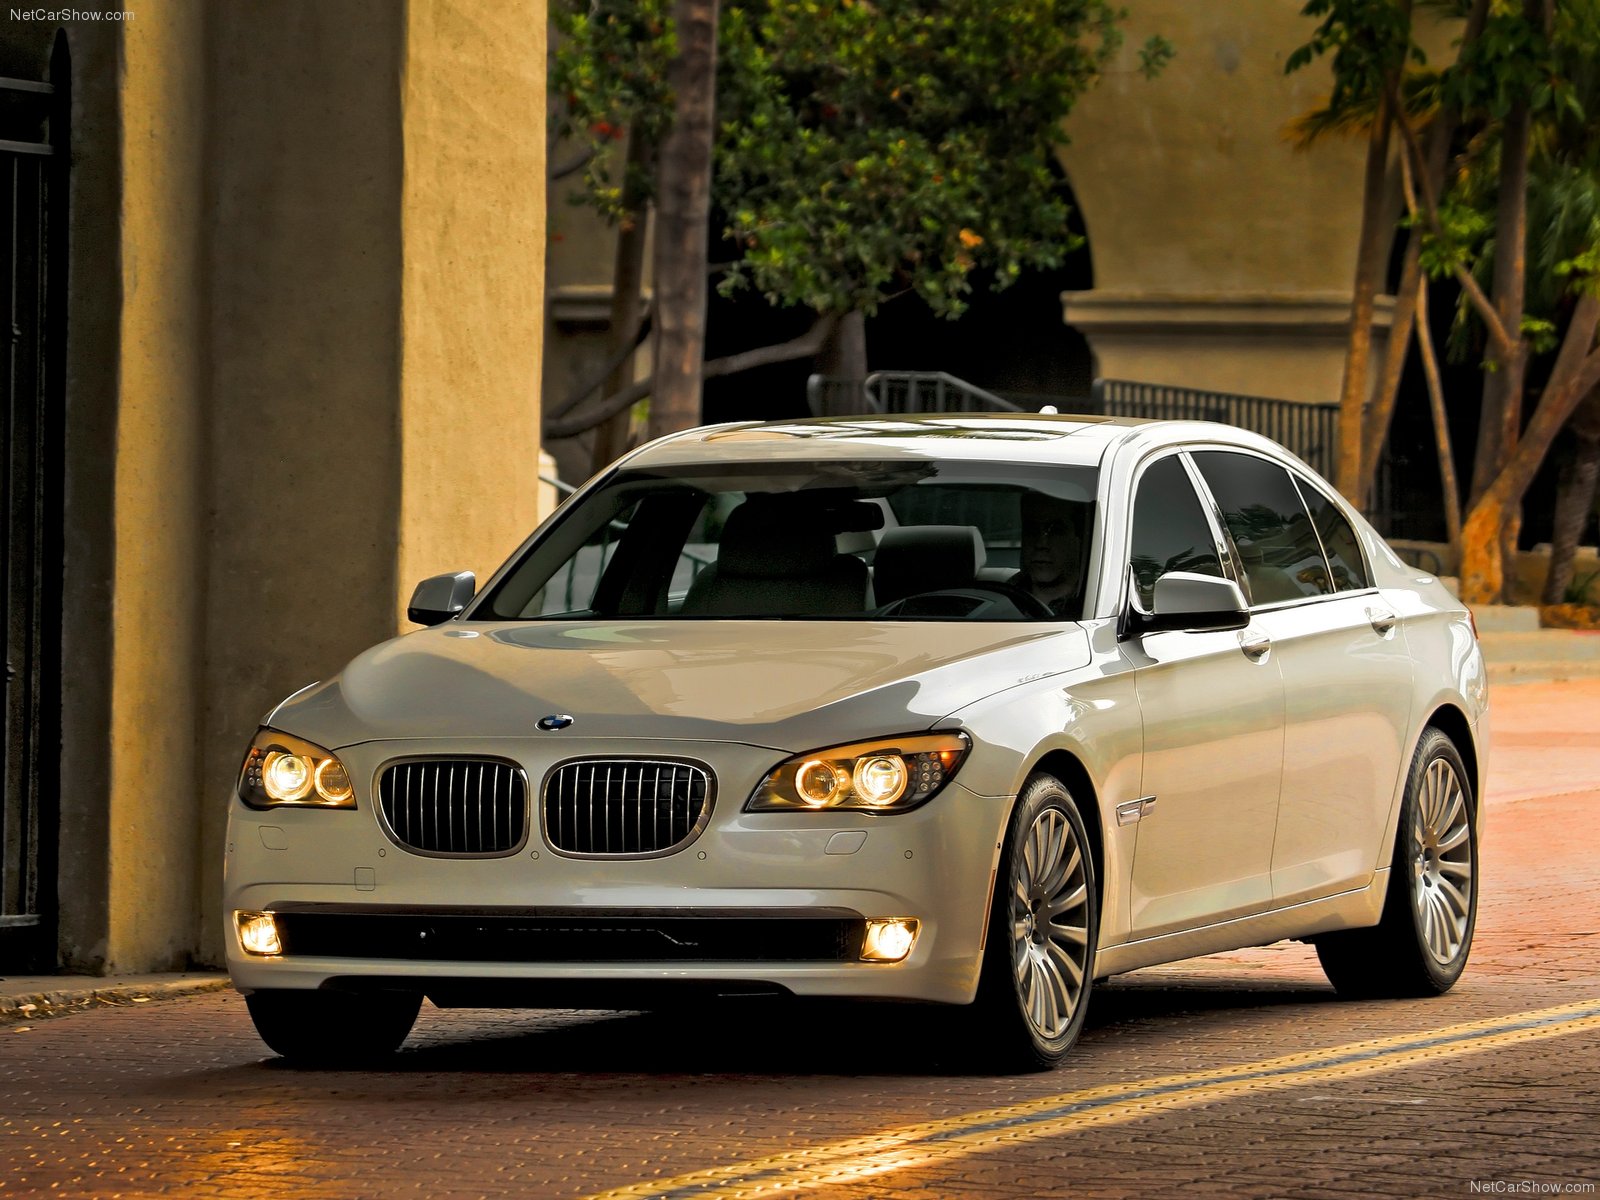 BMW 7-series F01 F02 photos - PhotoGallery with 120 pics| CarsBase.com